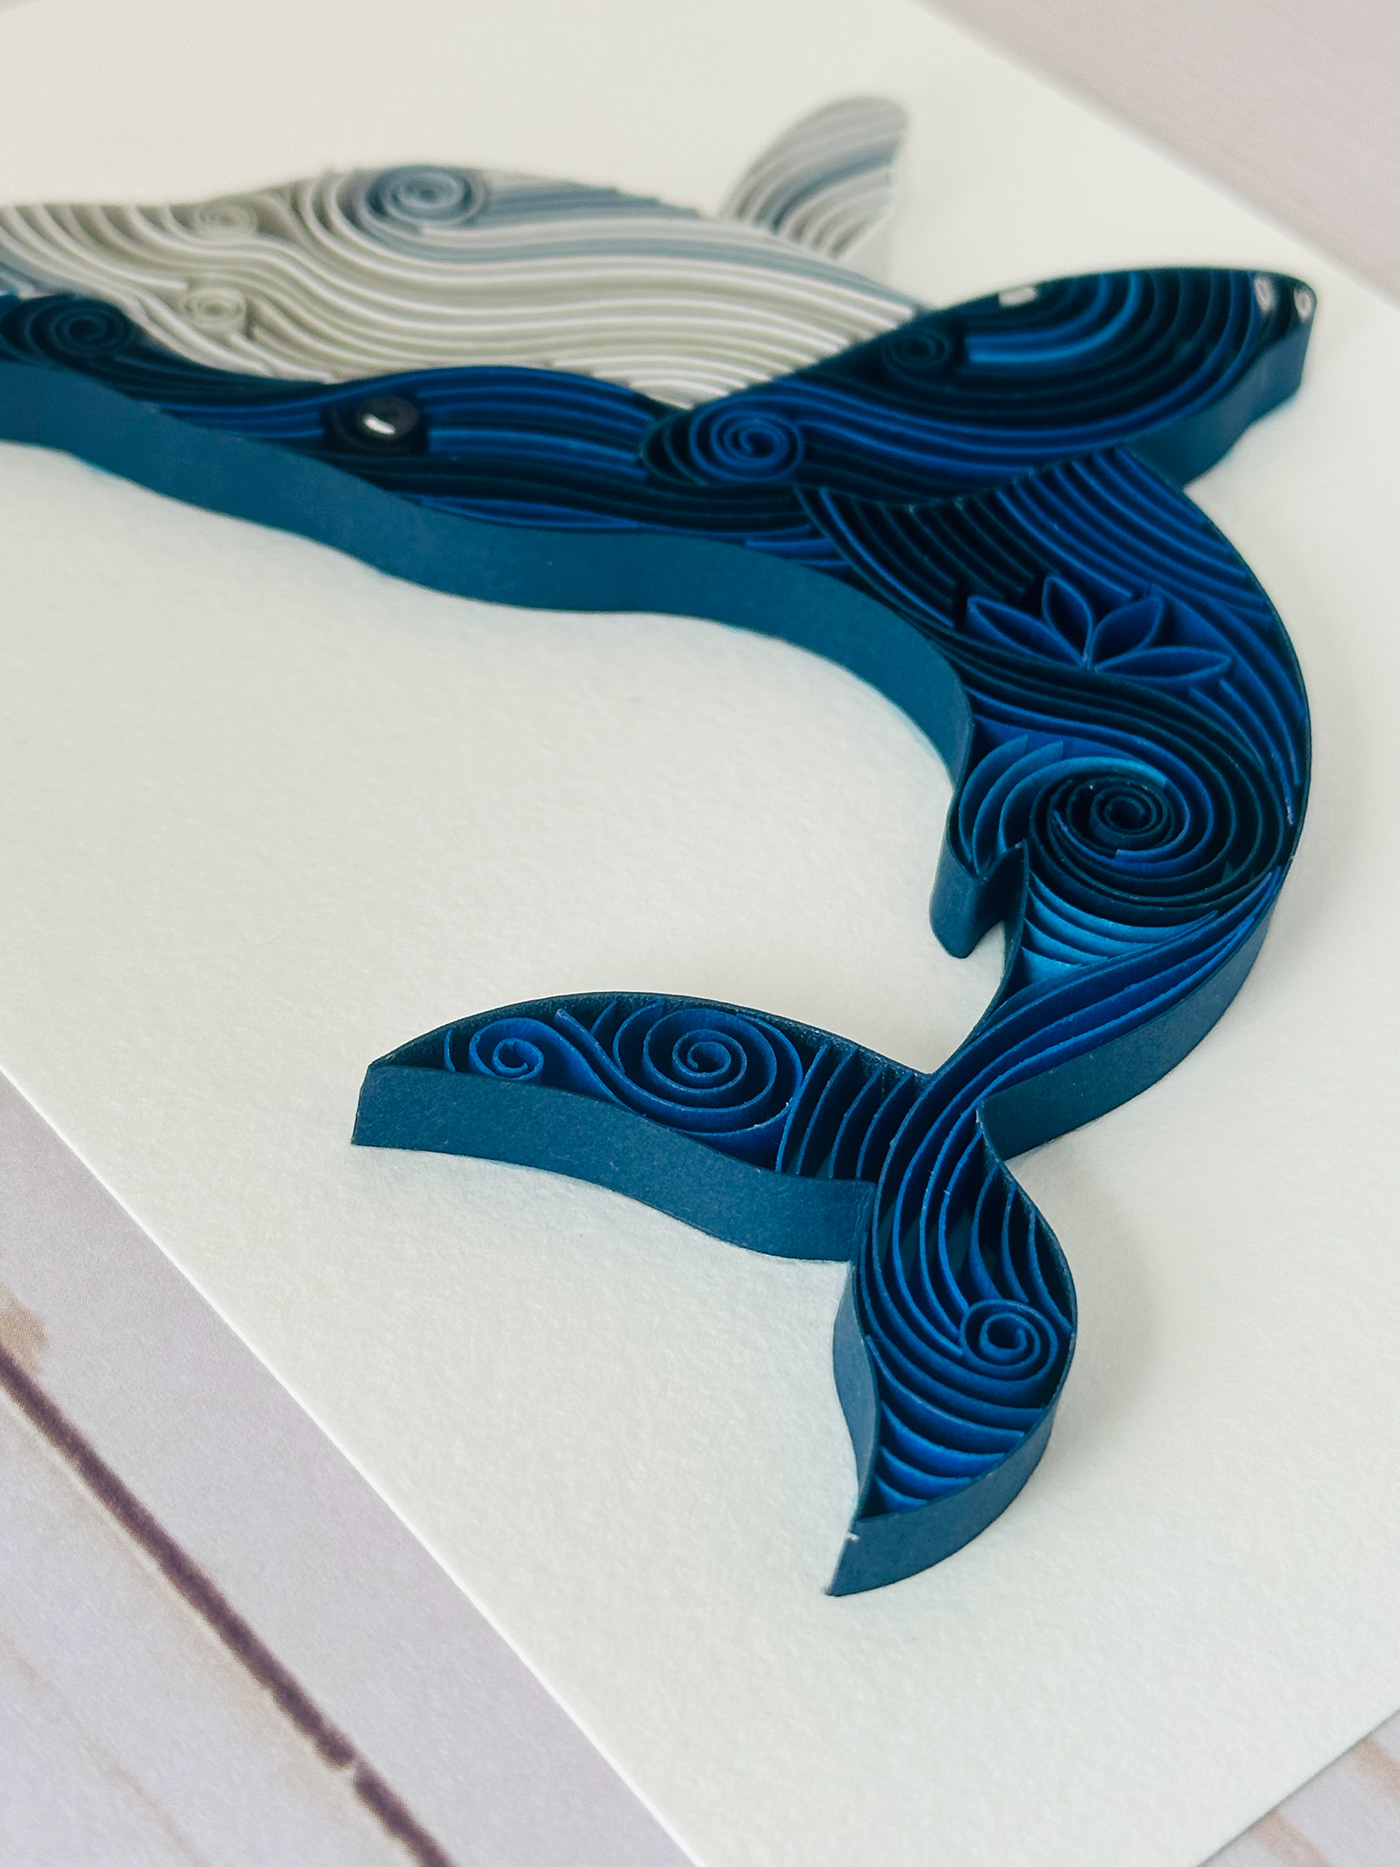 Whale ocean life wildlife paper blue quilling paper art craft